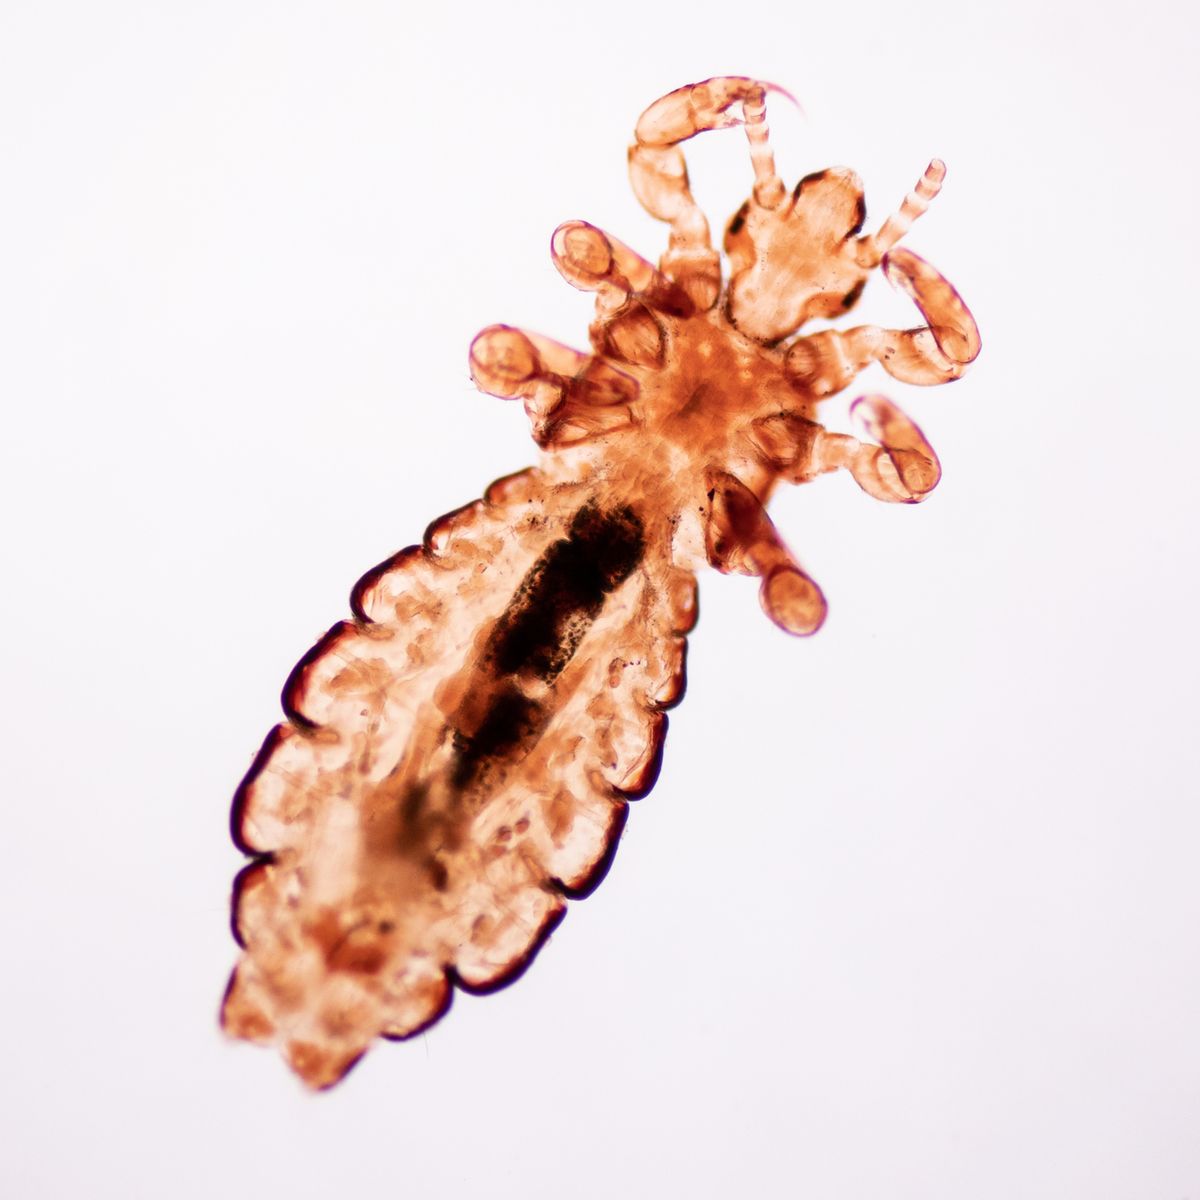 the head louse pediculus humanus capitis is a parasite live on the body, person or animal and live by sucking blood into food